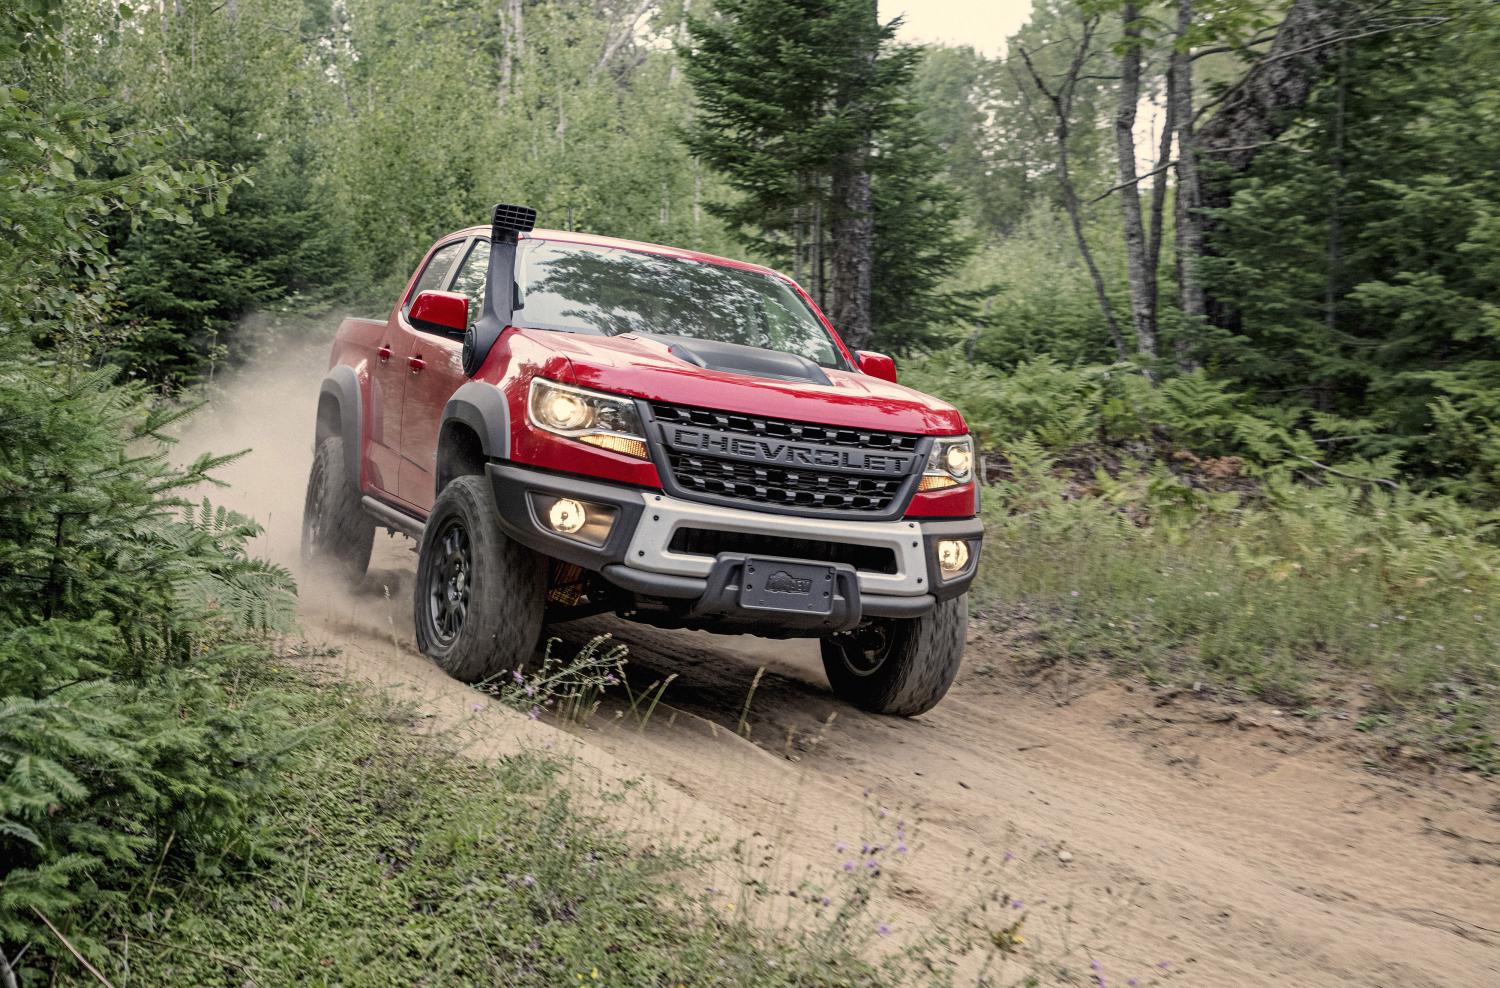 The Chevrolet Colorado ZR2 Bison Is A Beefed-Up Off-Road Menace